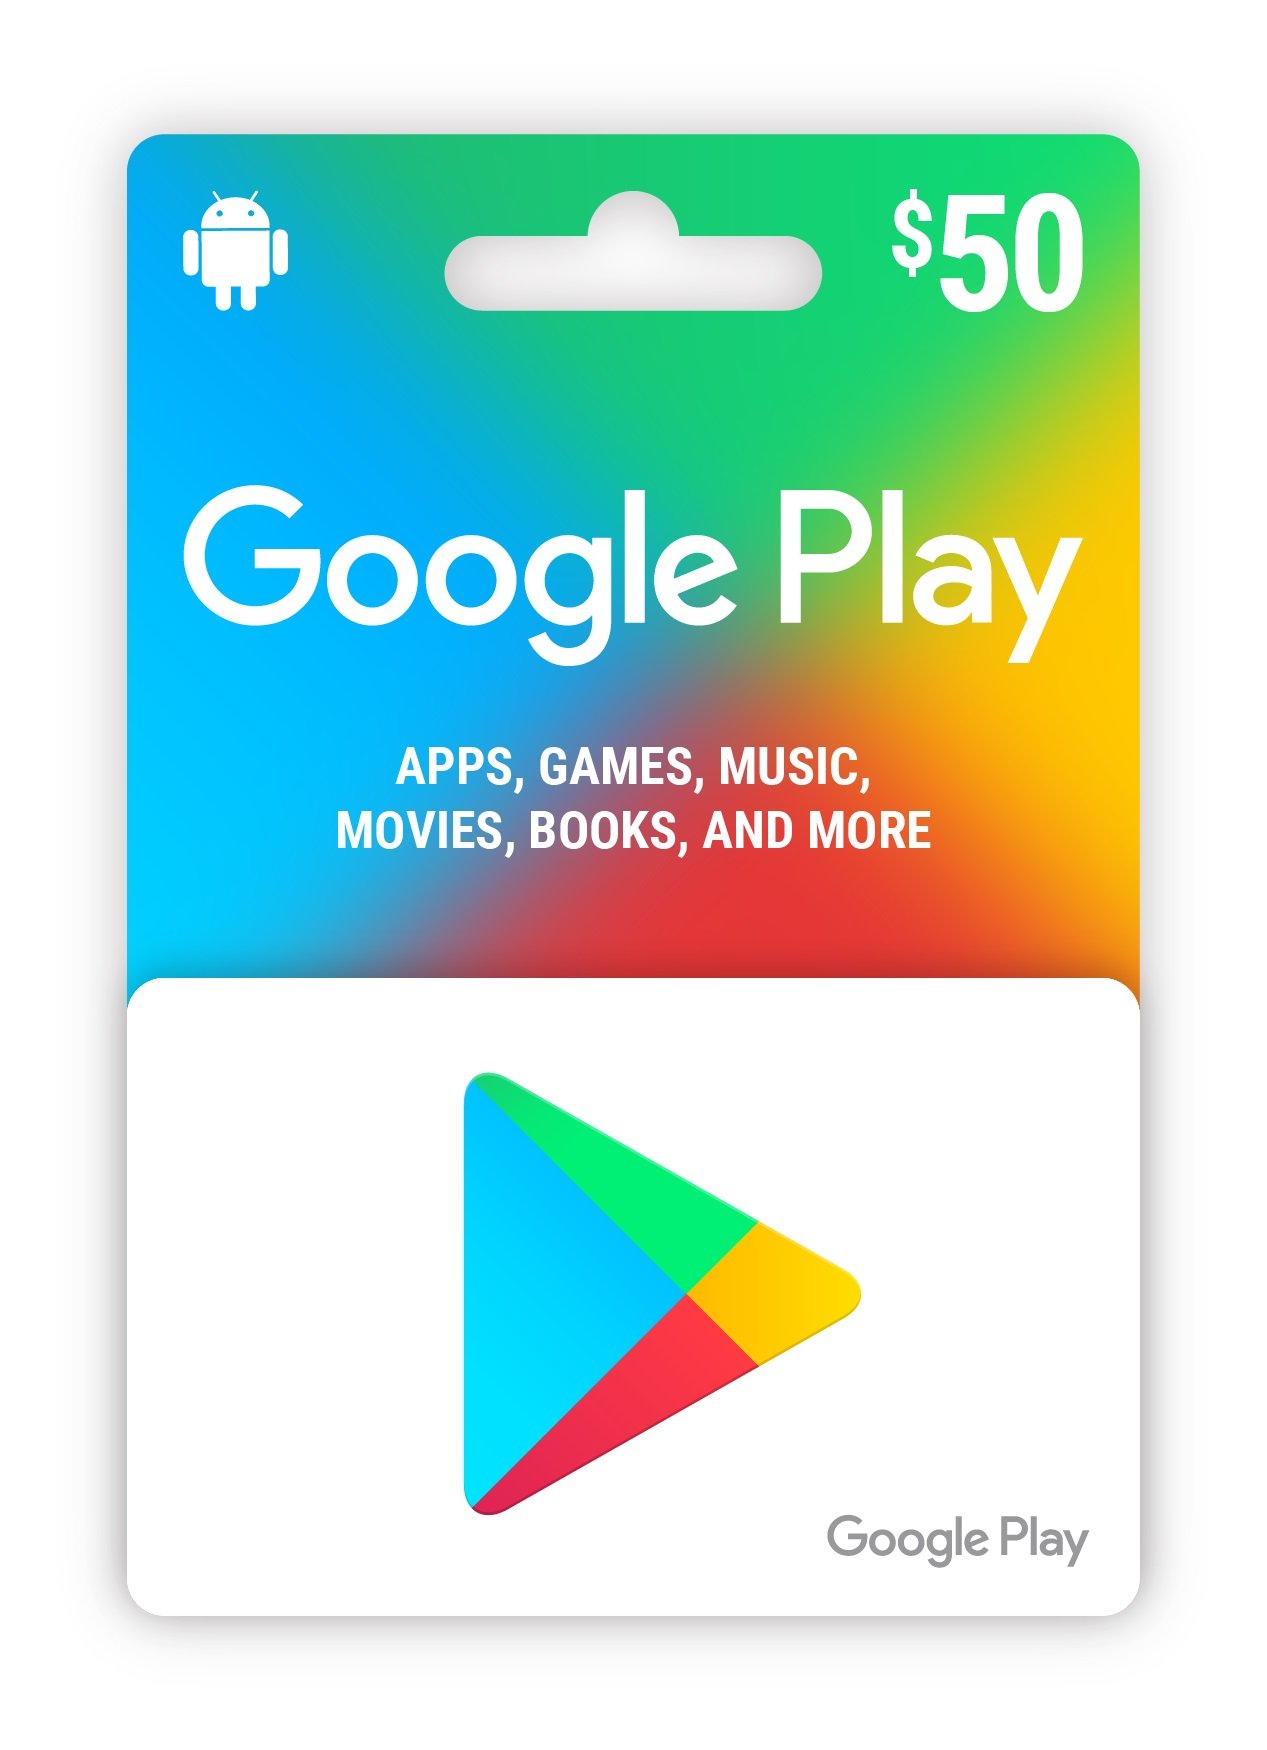 How to Buy 1$ Google Play Gift Card?